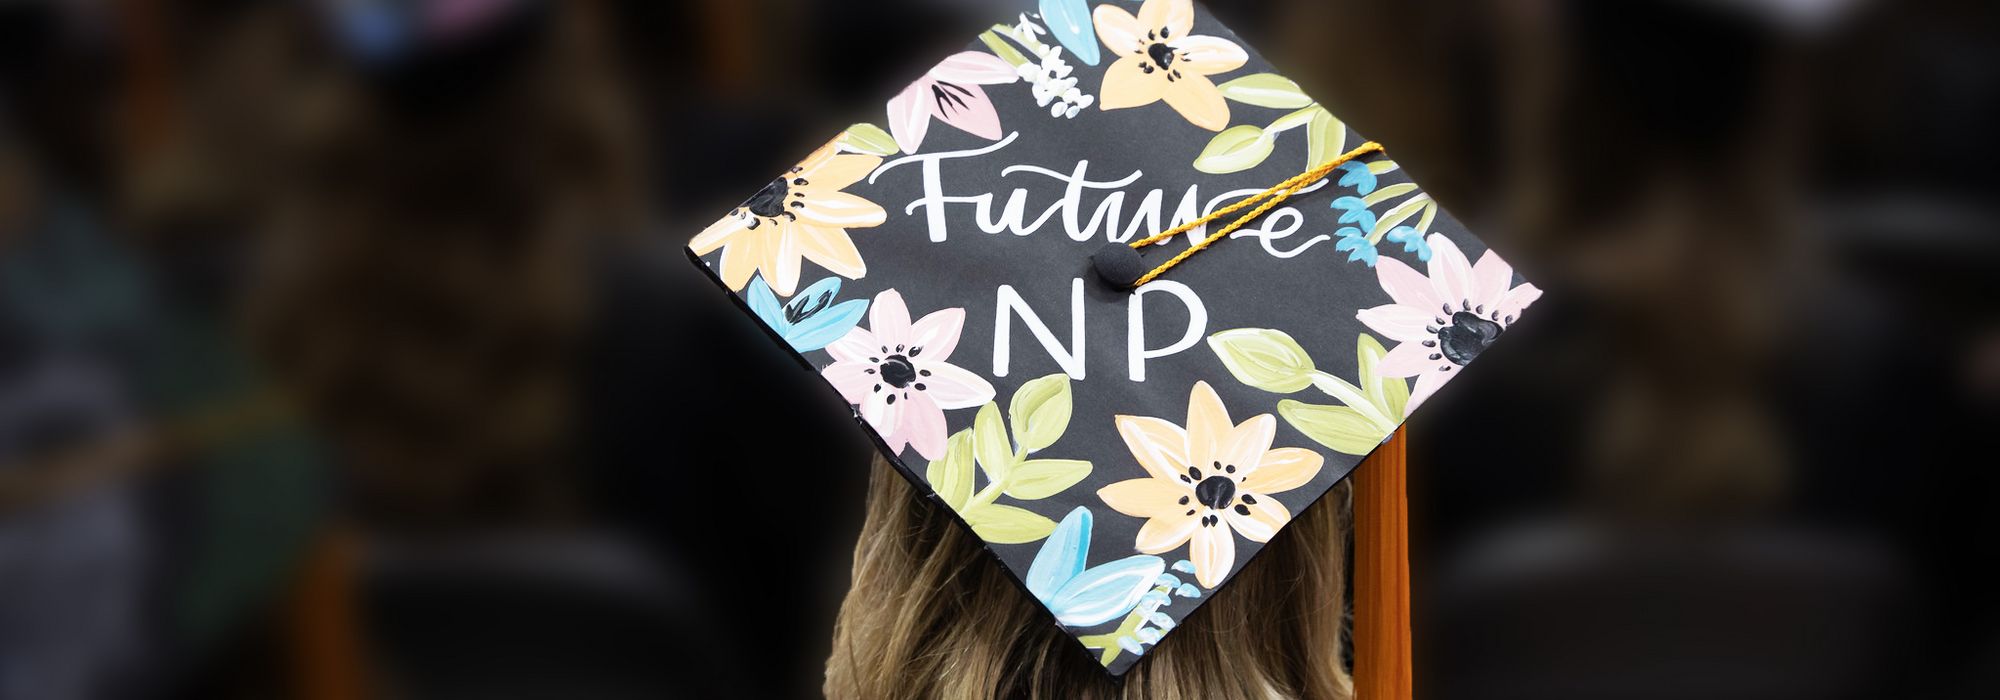 graduation cap that reads "Future NP" with a painted flower border